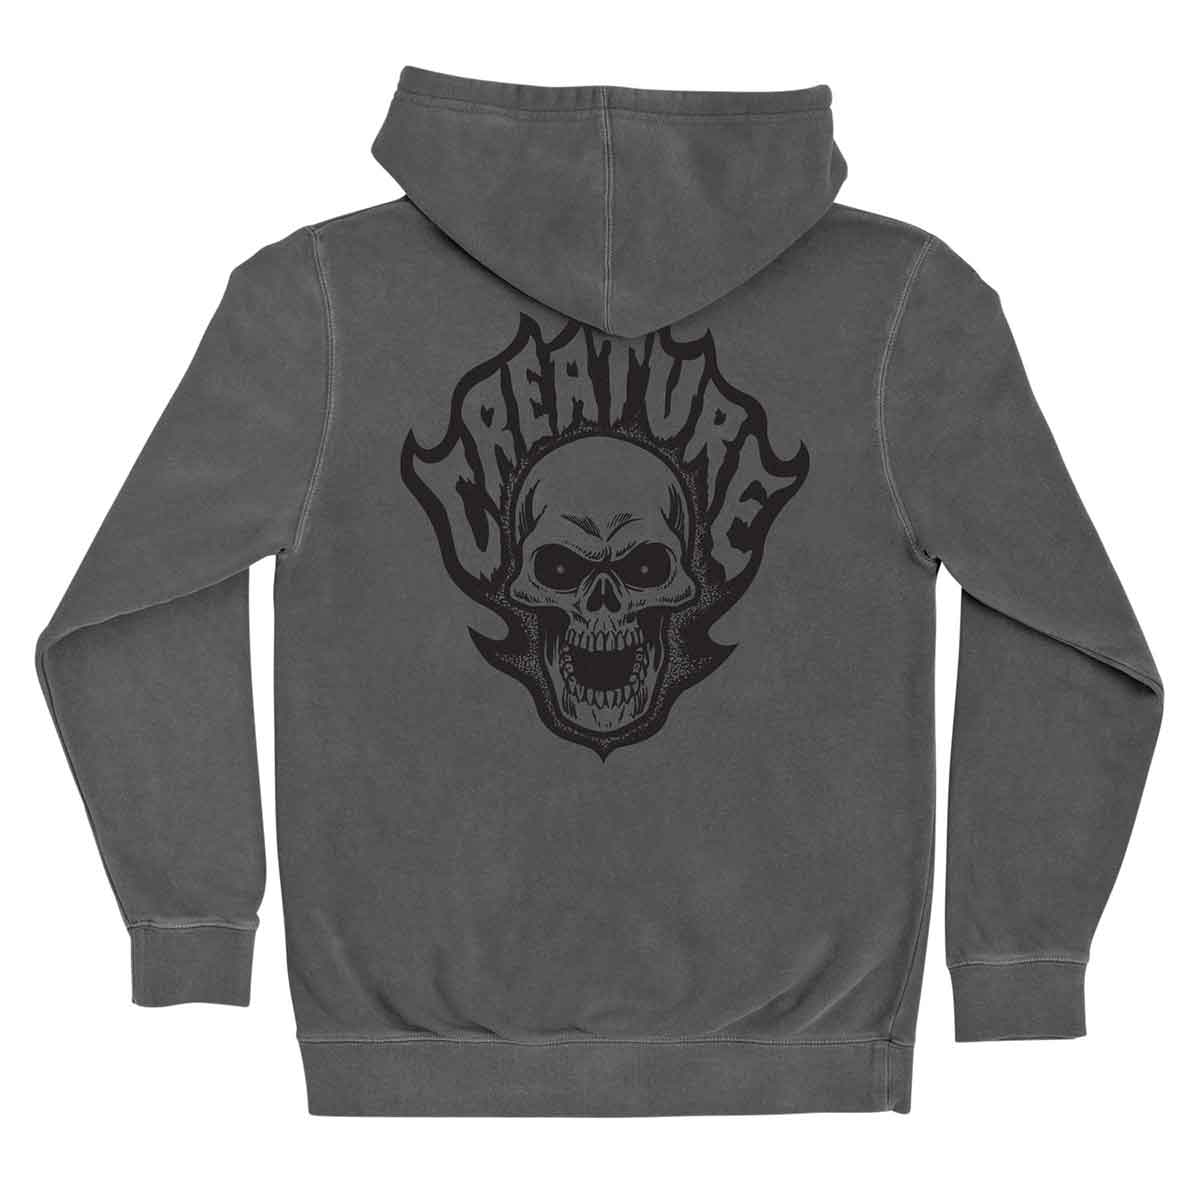 Creature Skateboards Bonehead Flame Midweight Pullover Hoodie - Pigment ...